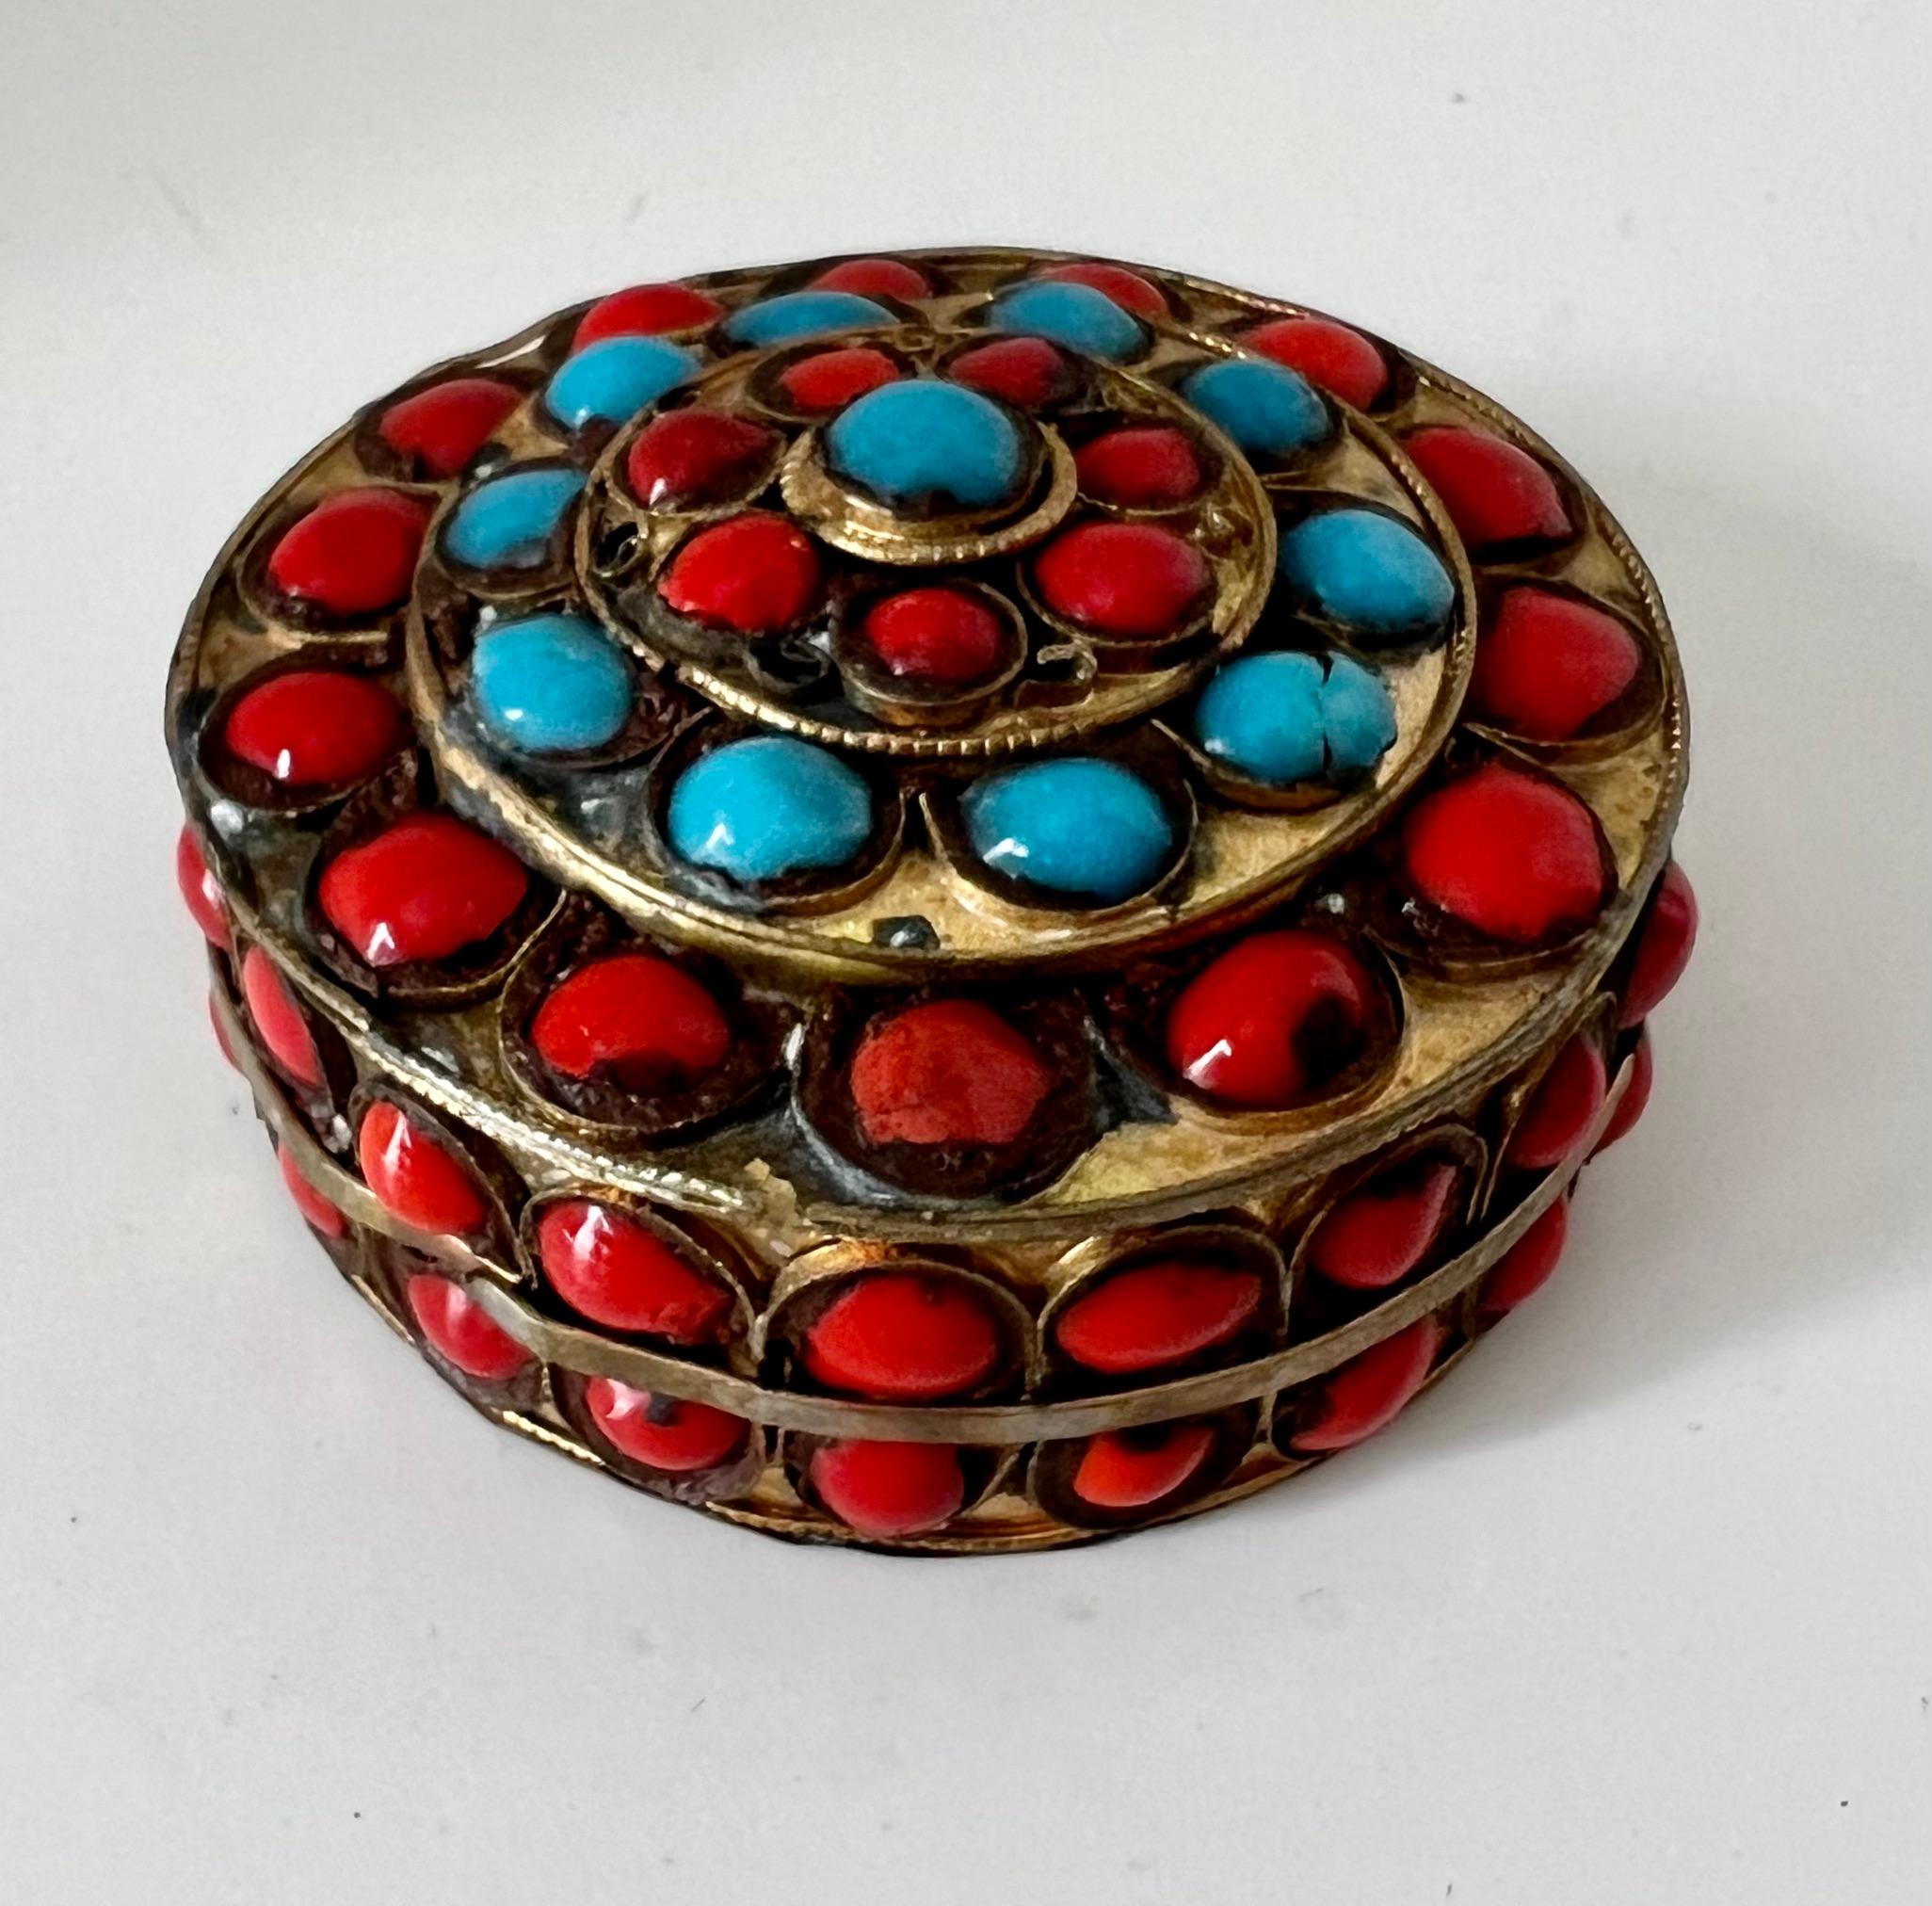 Vibrant and bold multi-color Beaded box.  The bead colors and arrangement makes the piece a fine decorative piece.

A compliment to many settings, on a desk or work station to hold everything from paper clips to 420.
A pill box or stash box... or